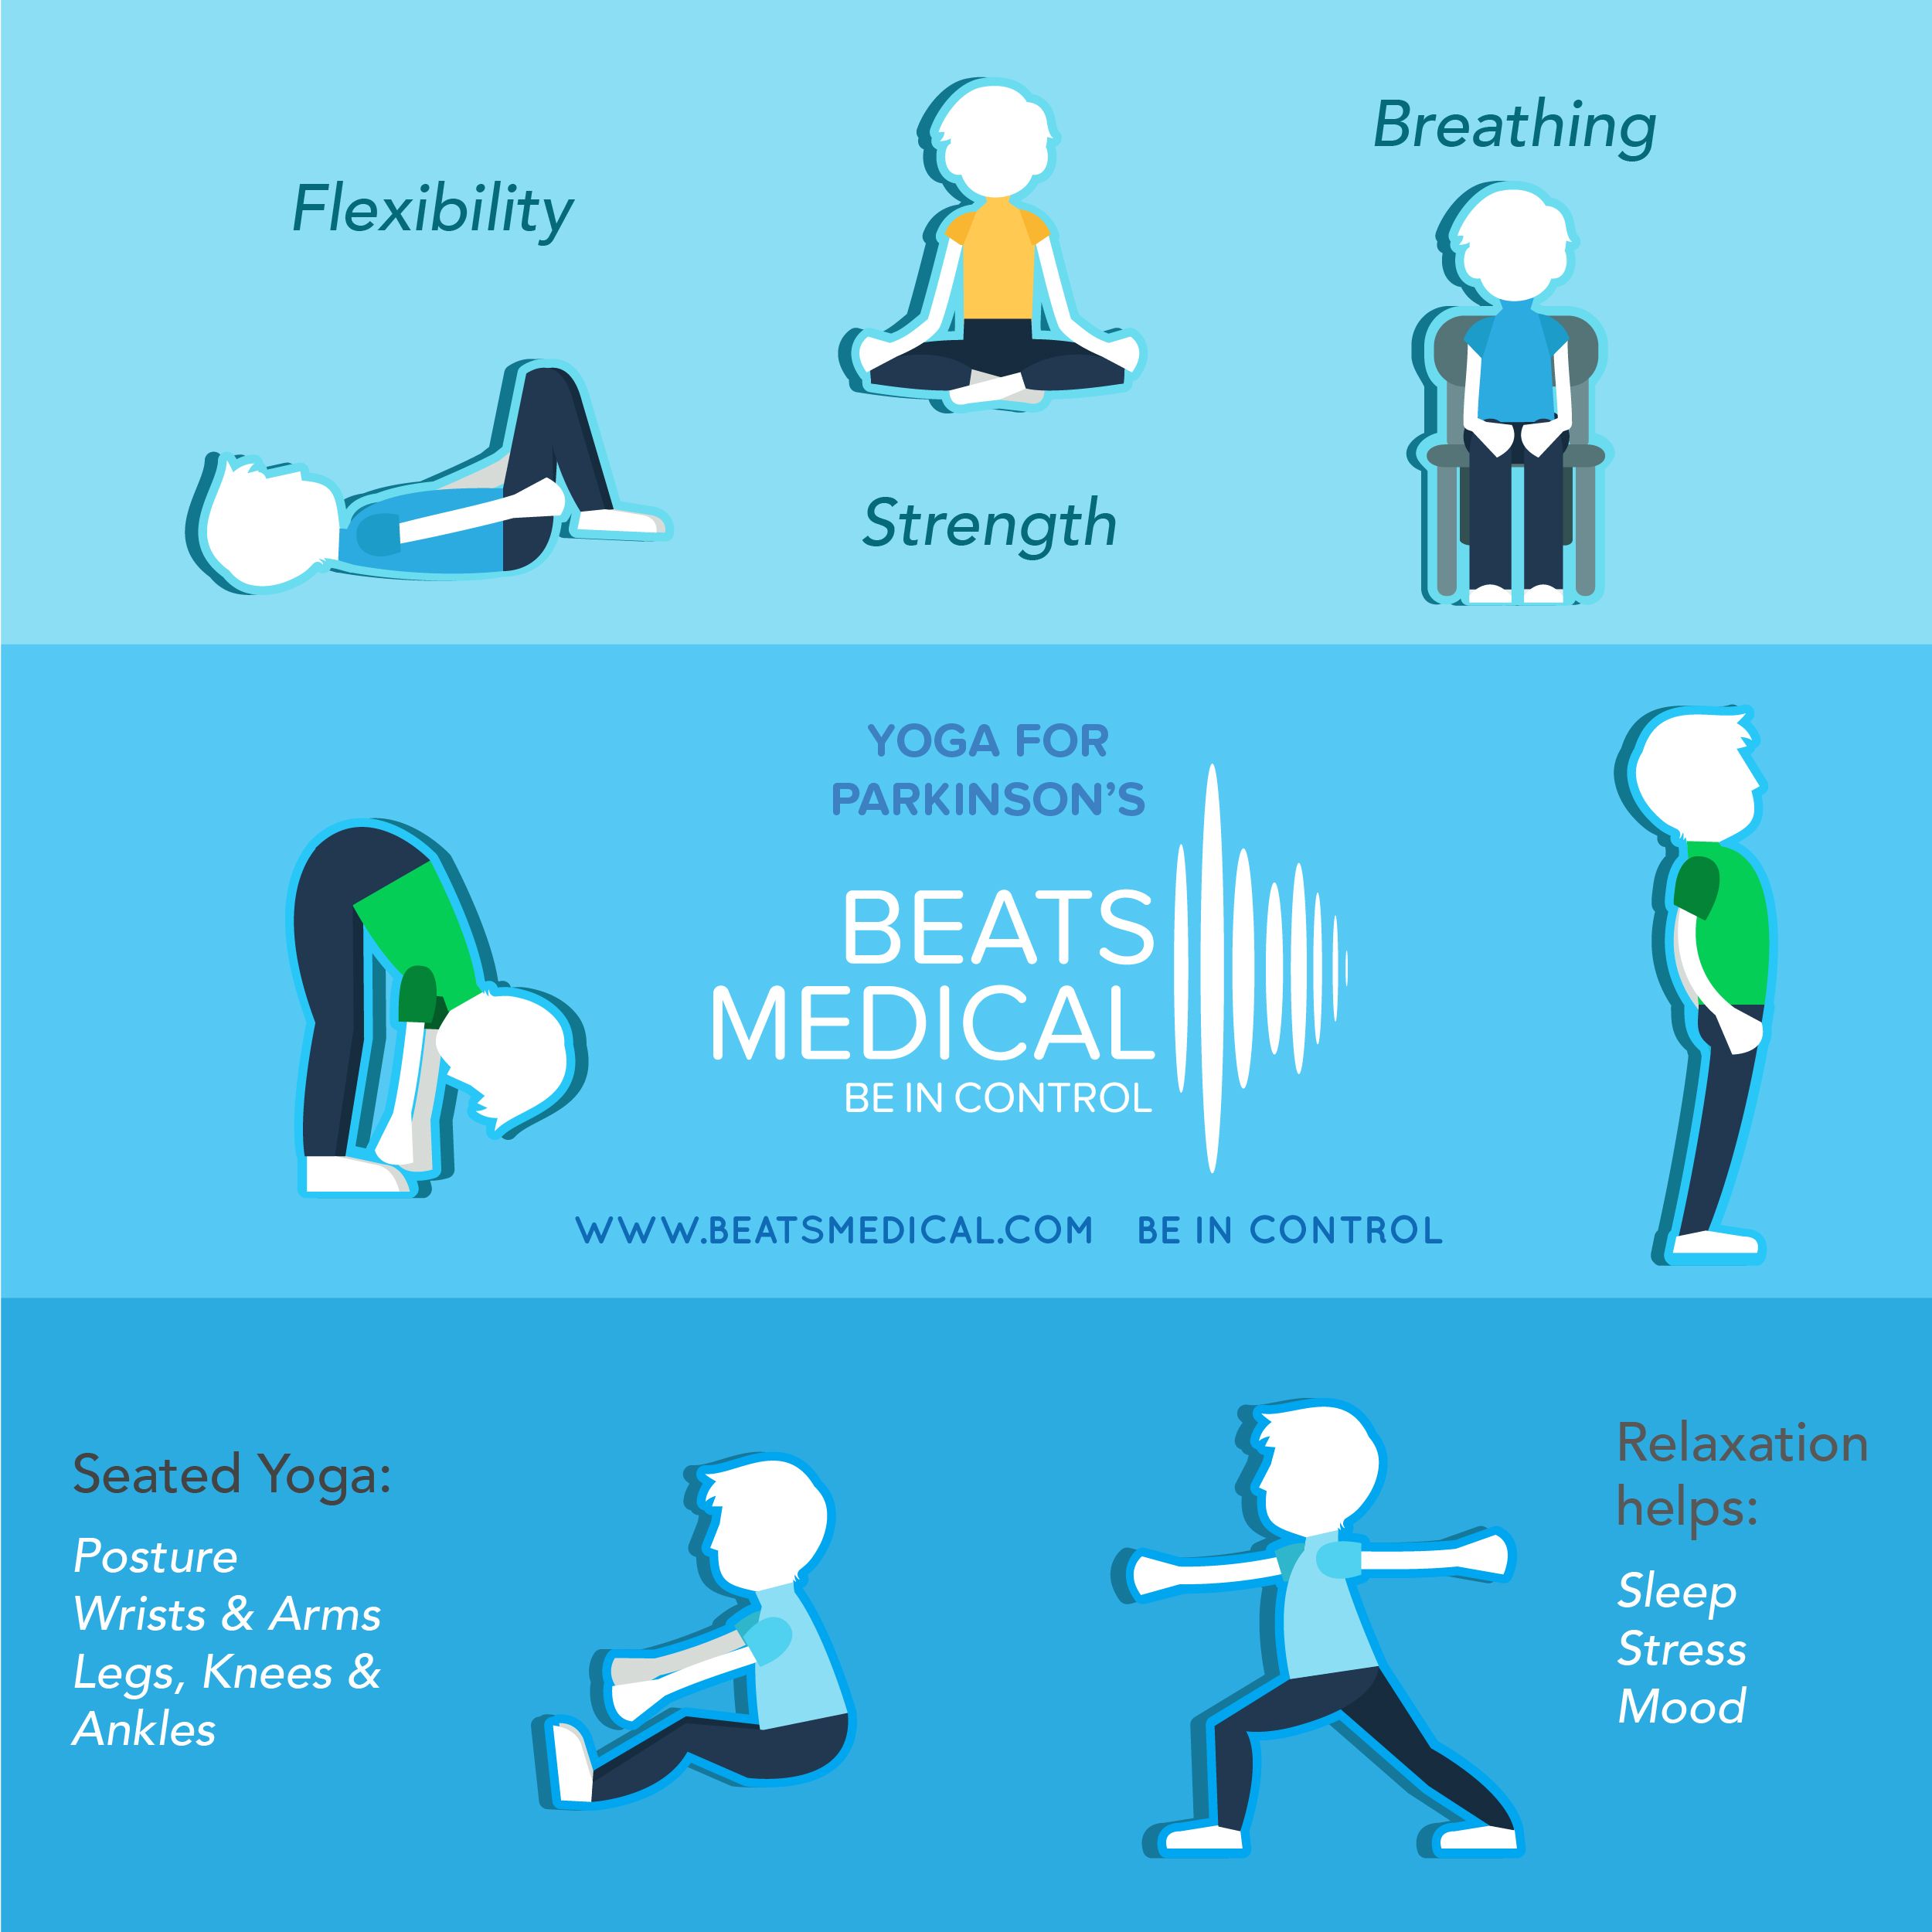 An Infographic about the benefits of yoga for people with Parkinson